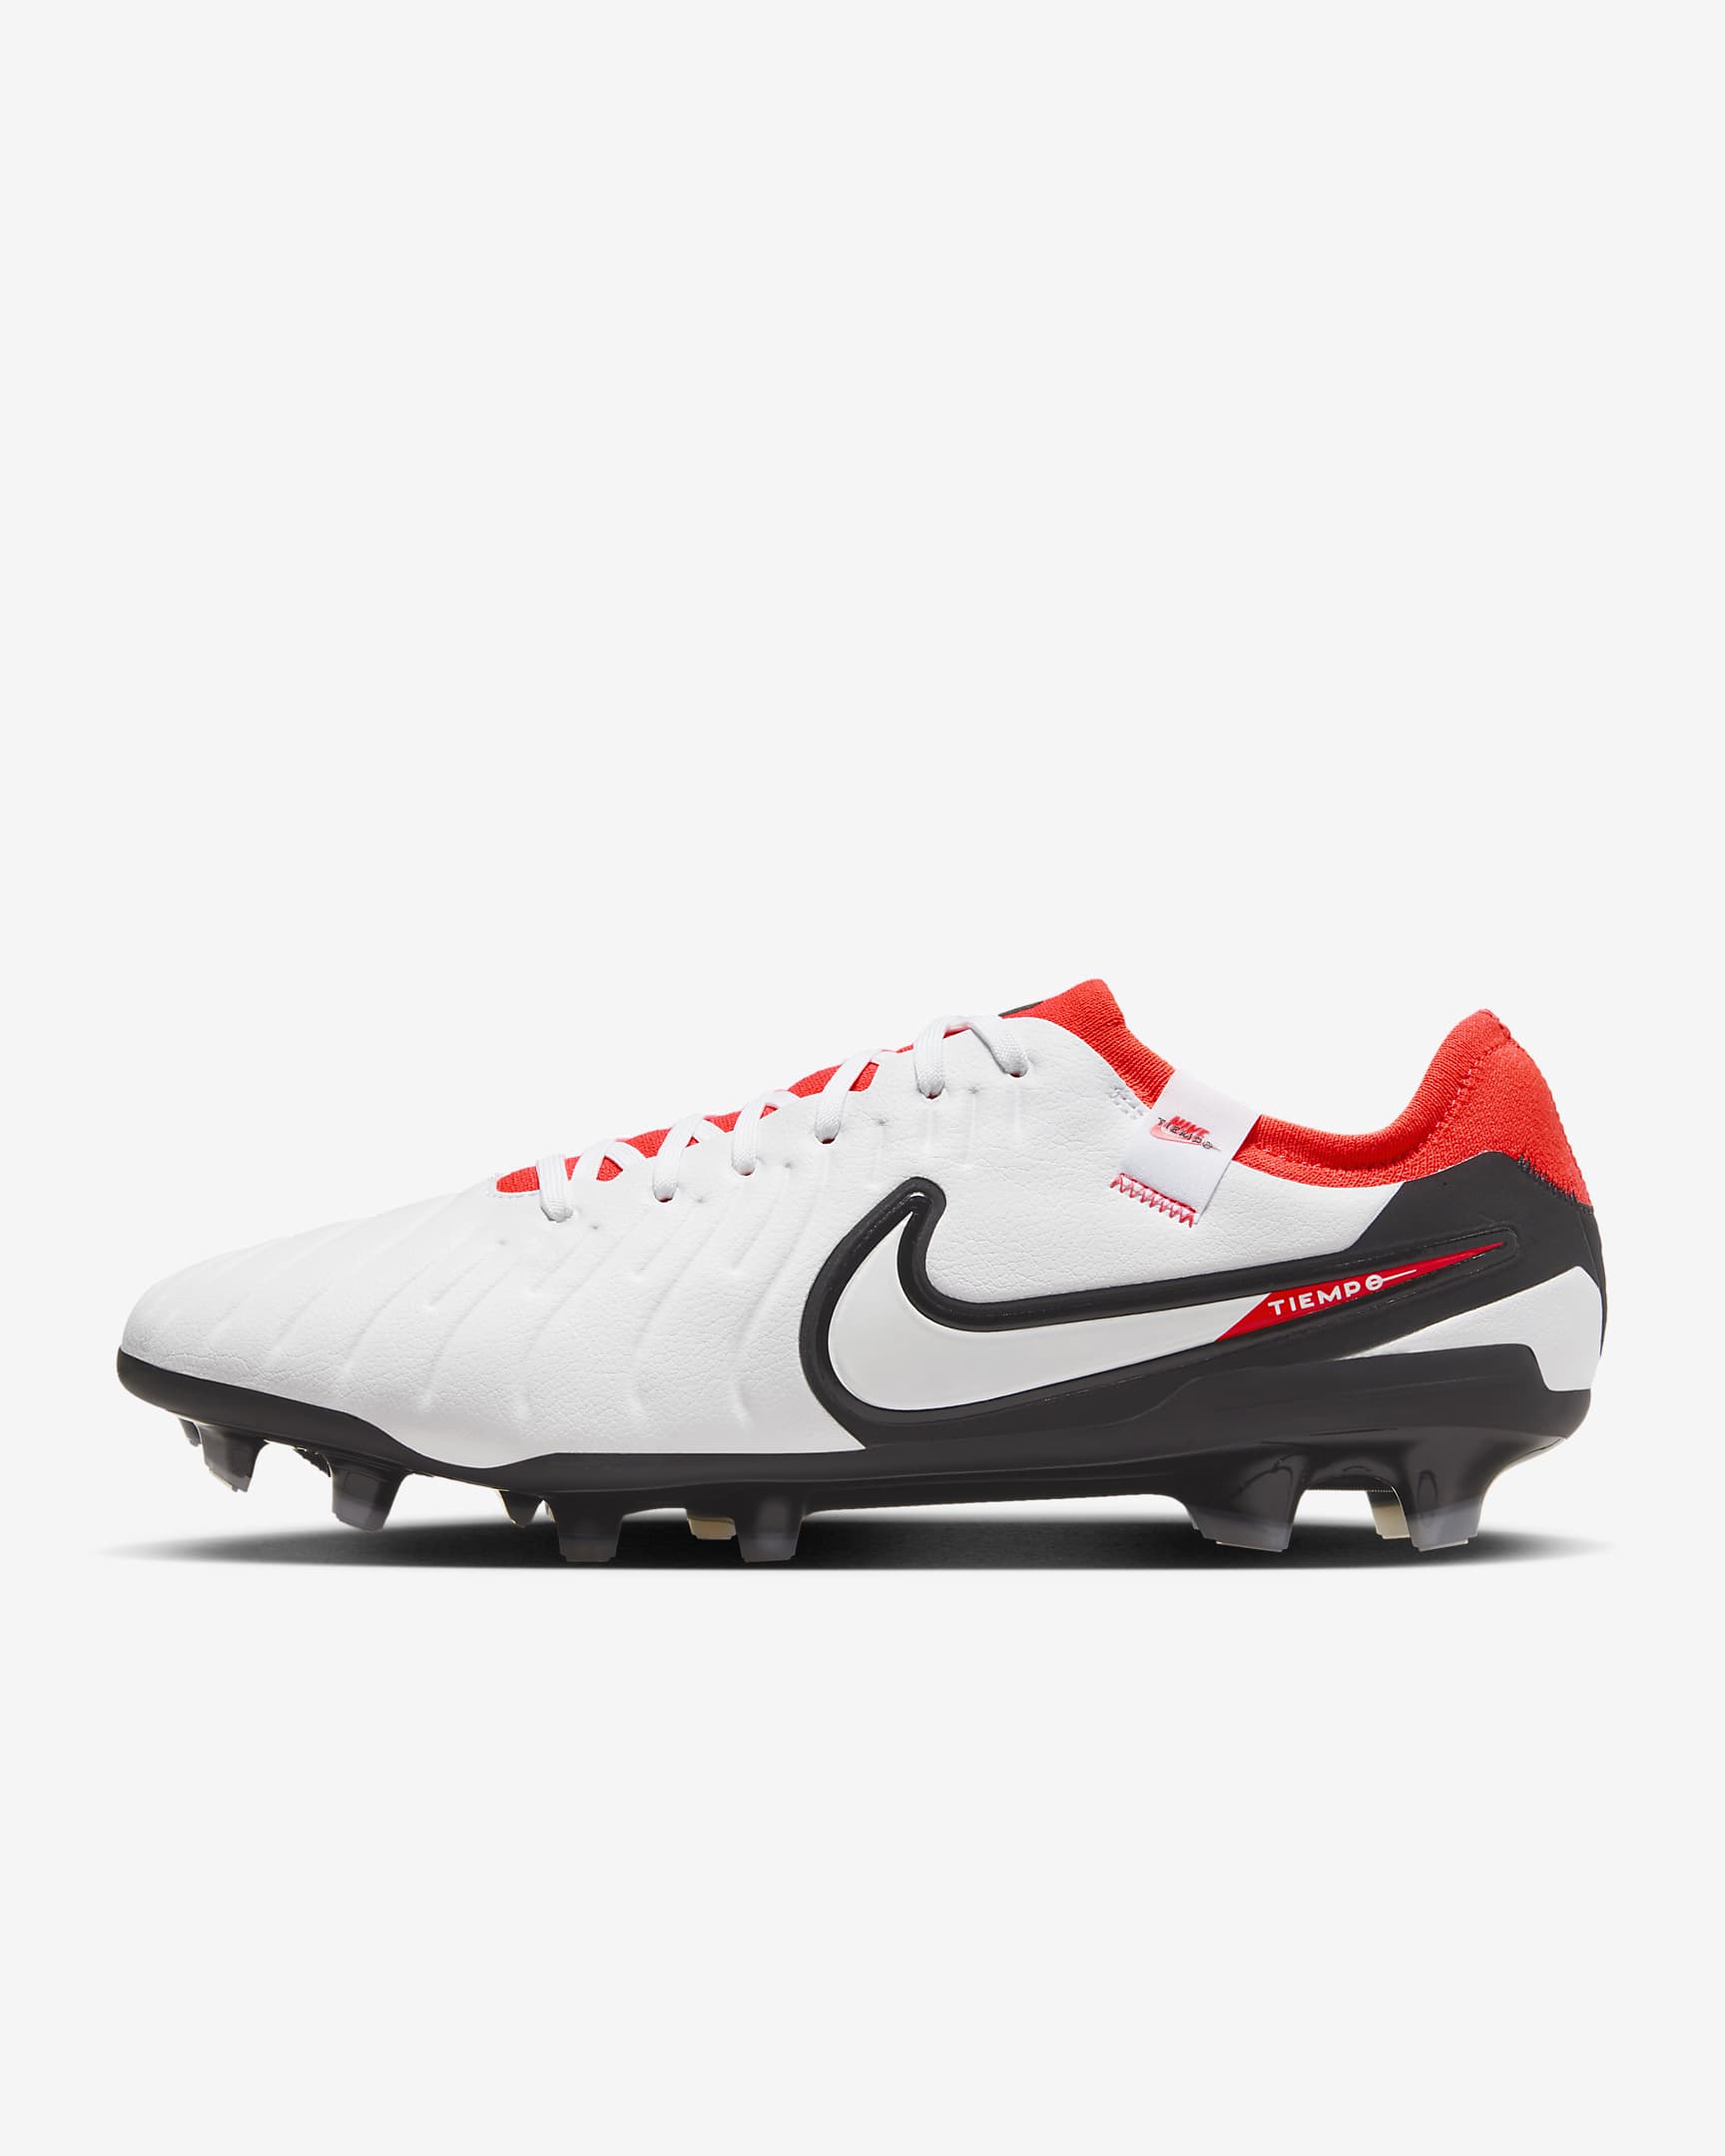 Nike Tiempo Legend 10 Pro Firm-Ground Low-Top Football Boot. Nike NL